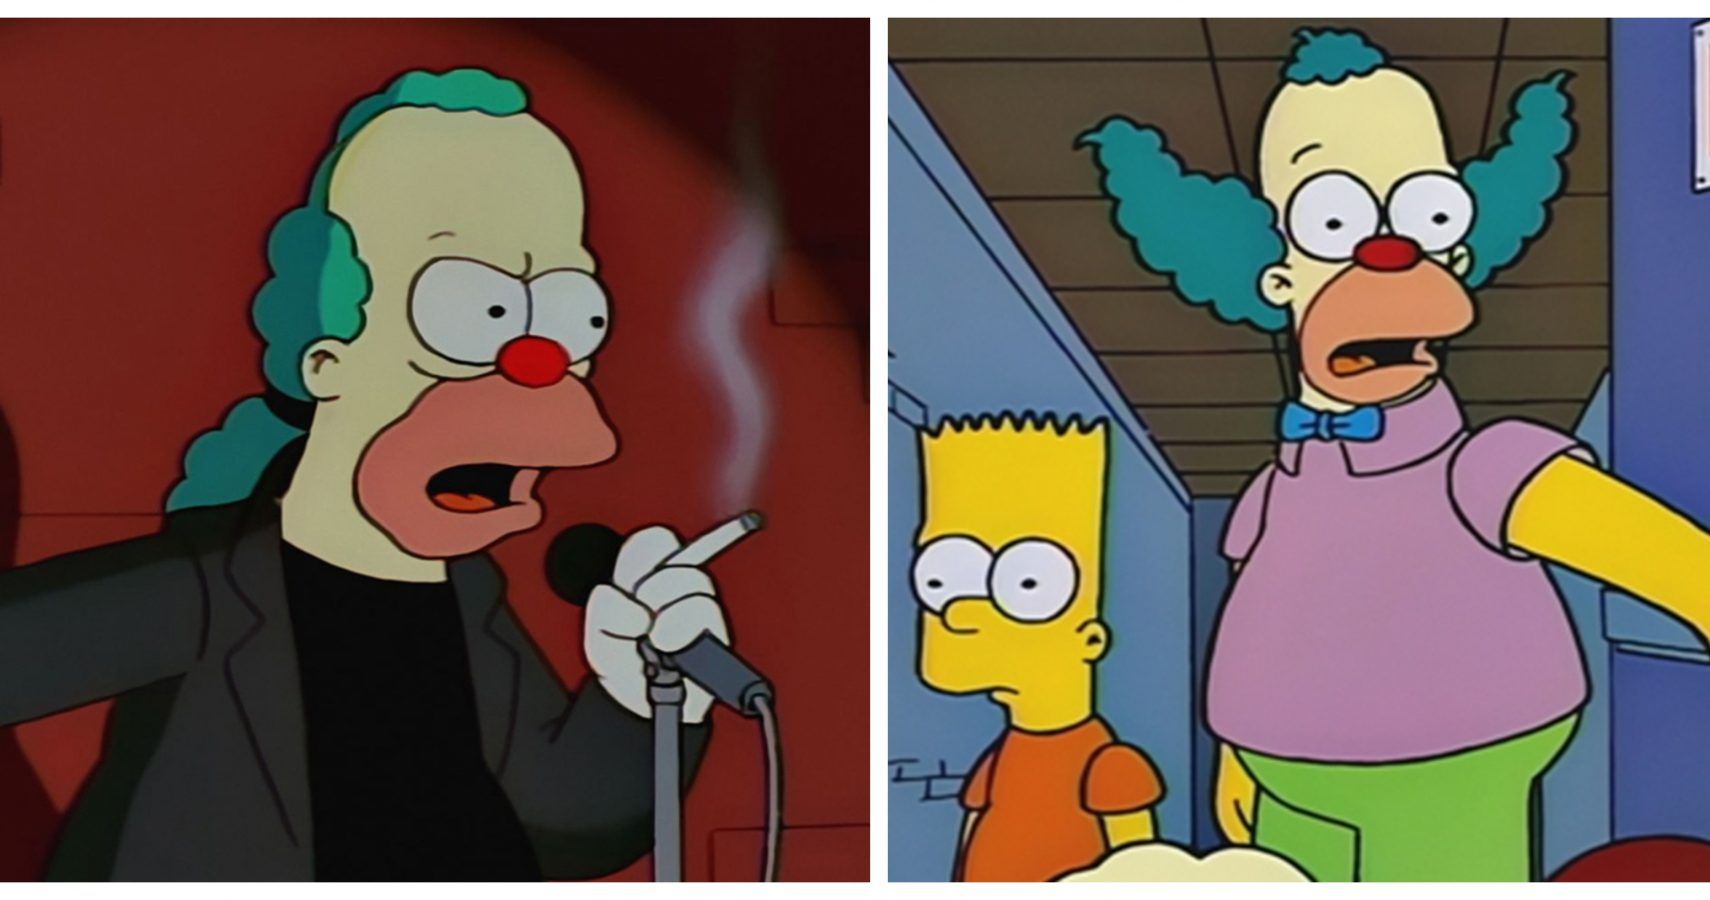 The Simpsons 10 Things You Didn’t Know About Krusty The Clown